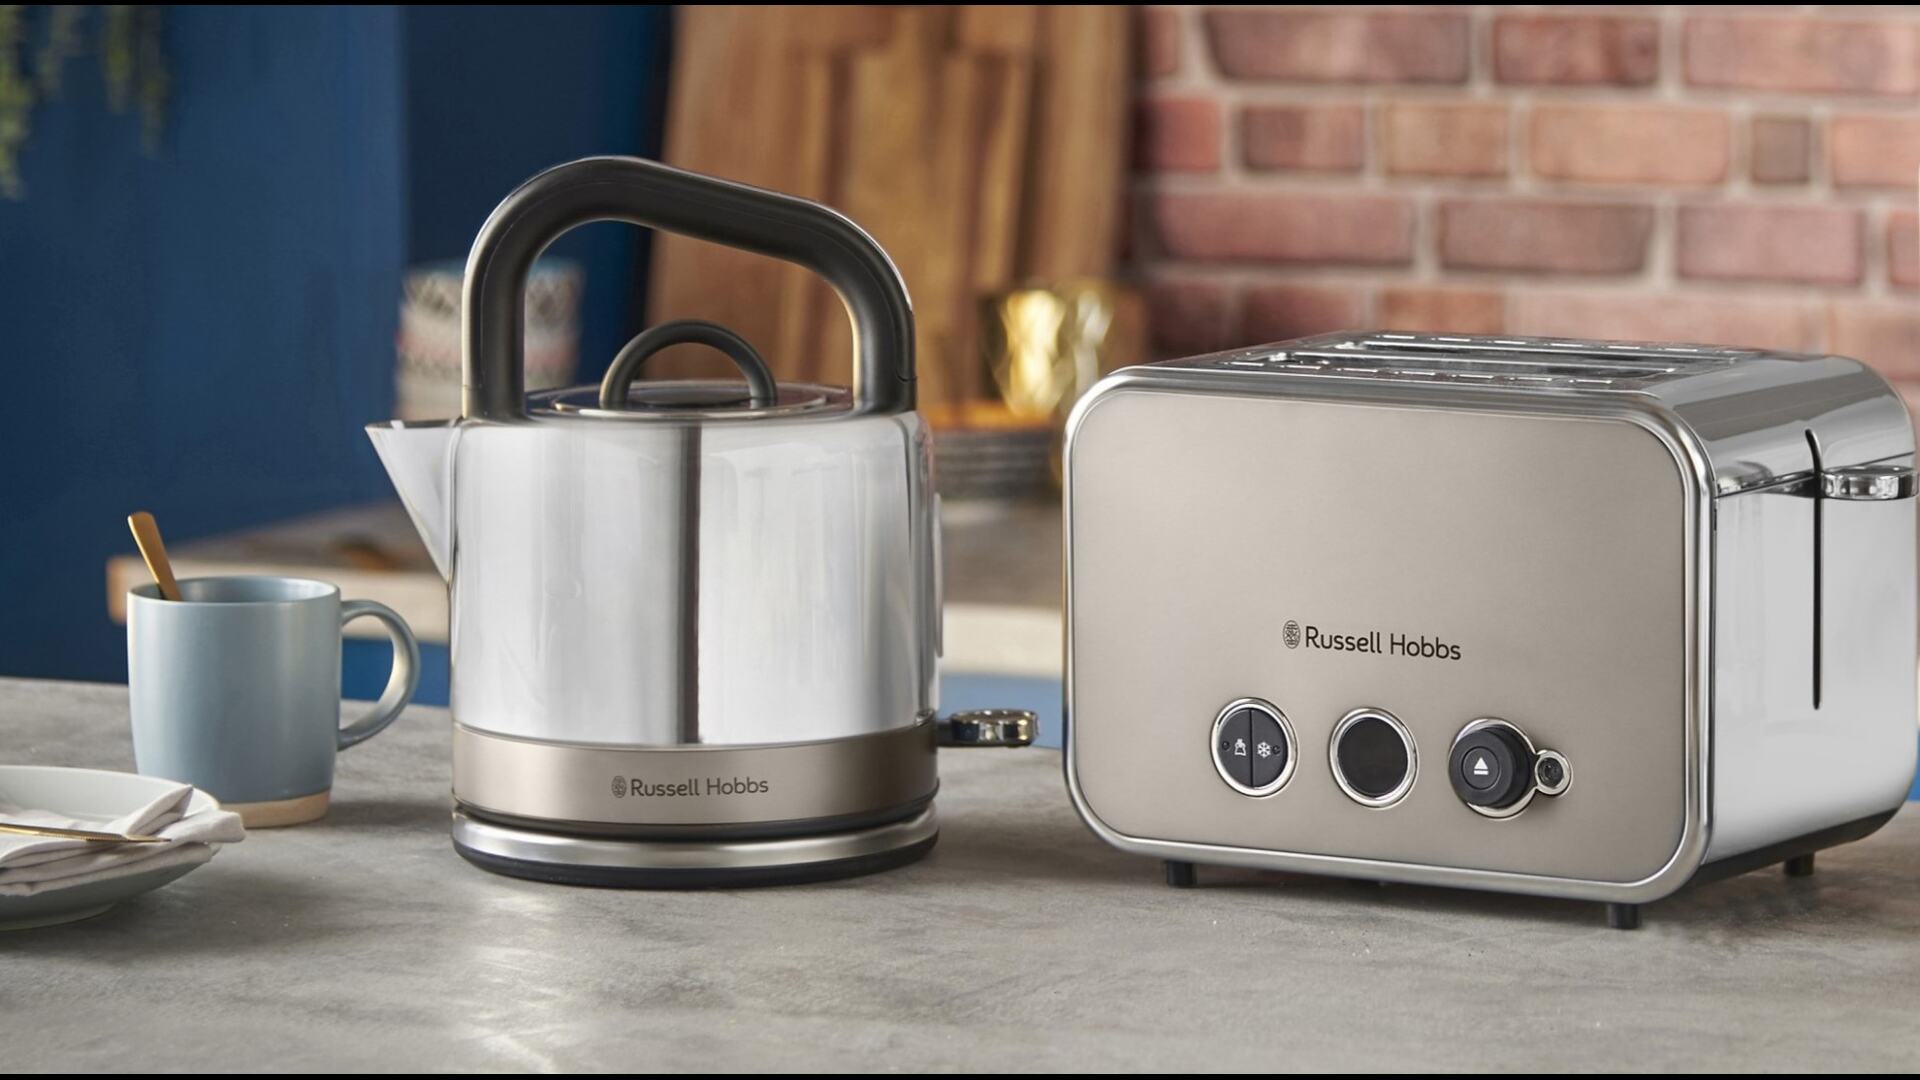 How To Buy The Best Kettle For Your Kitchen & Lifestyle